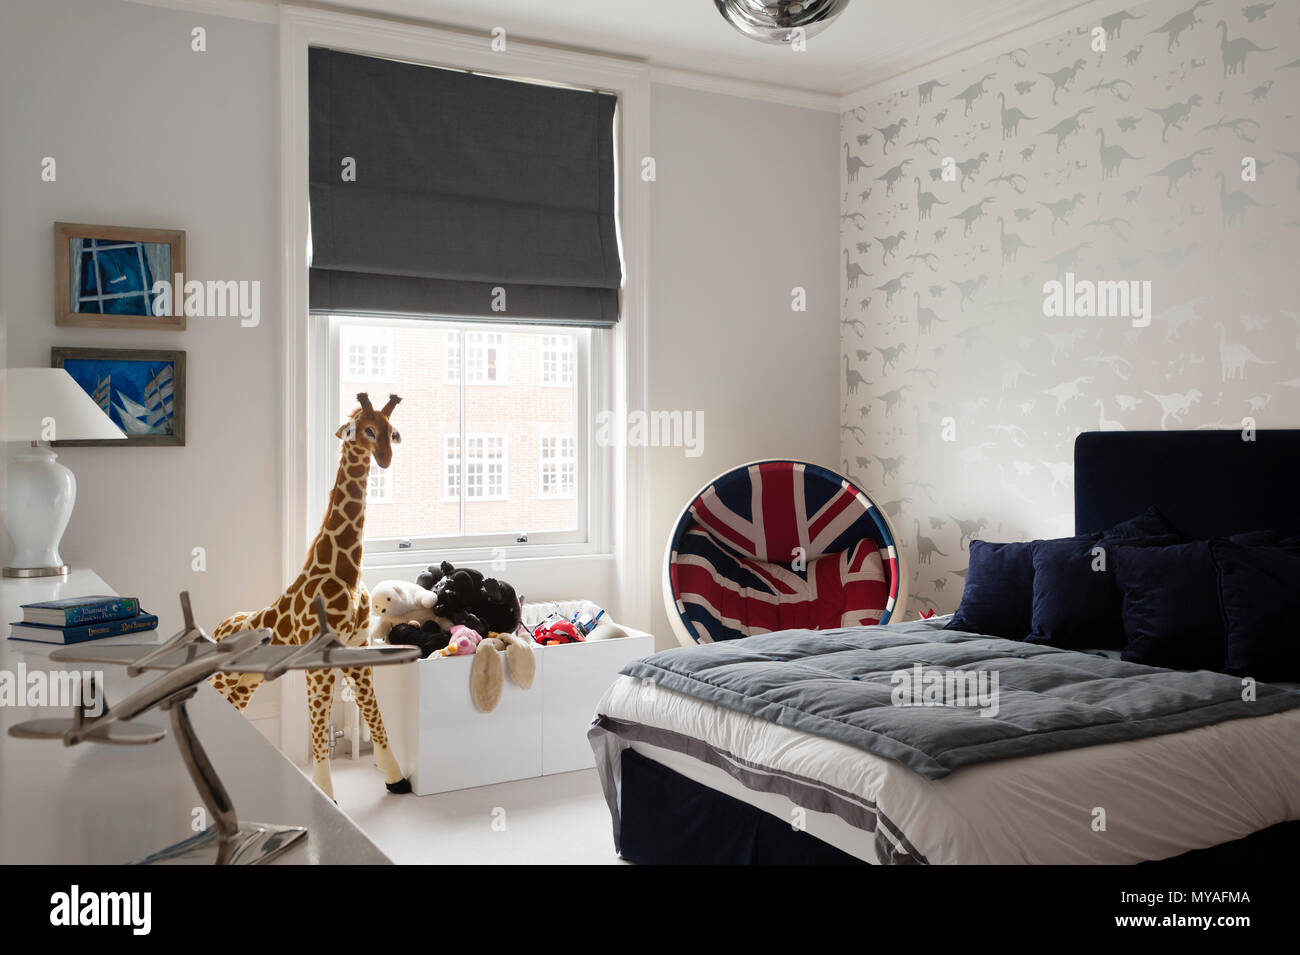 Child's bedroom in townhouse Stock Photo